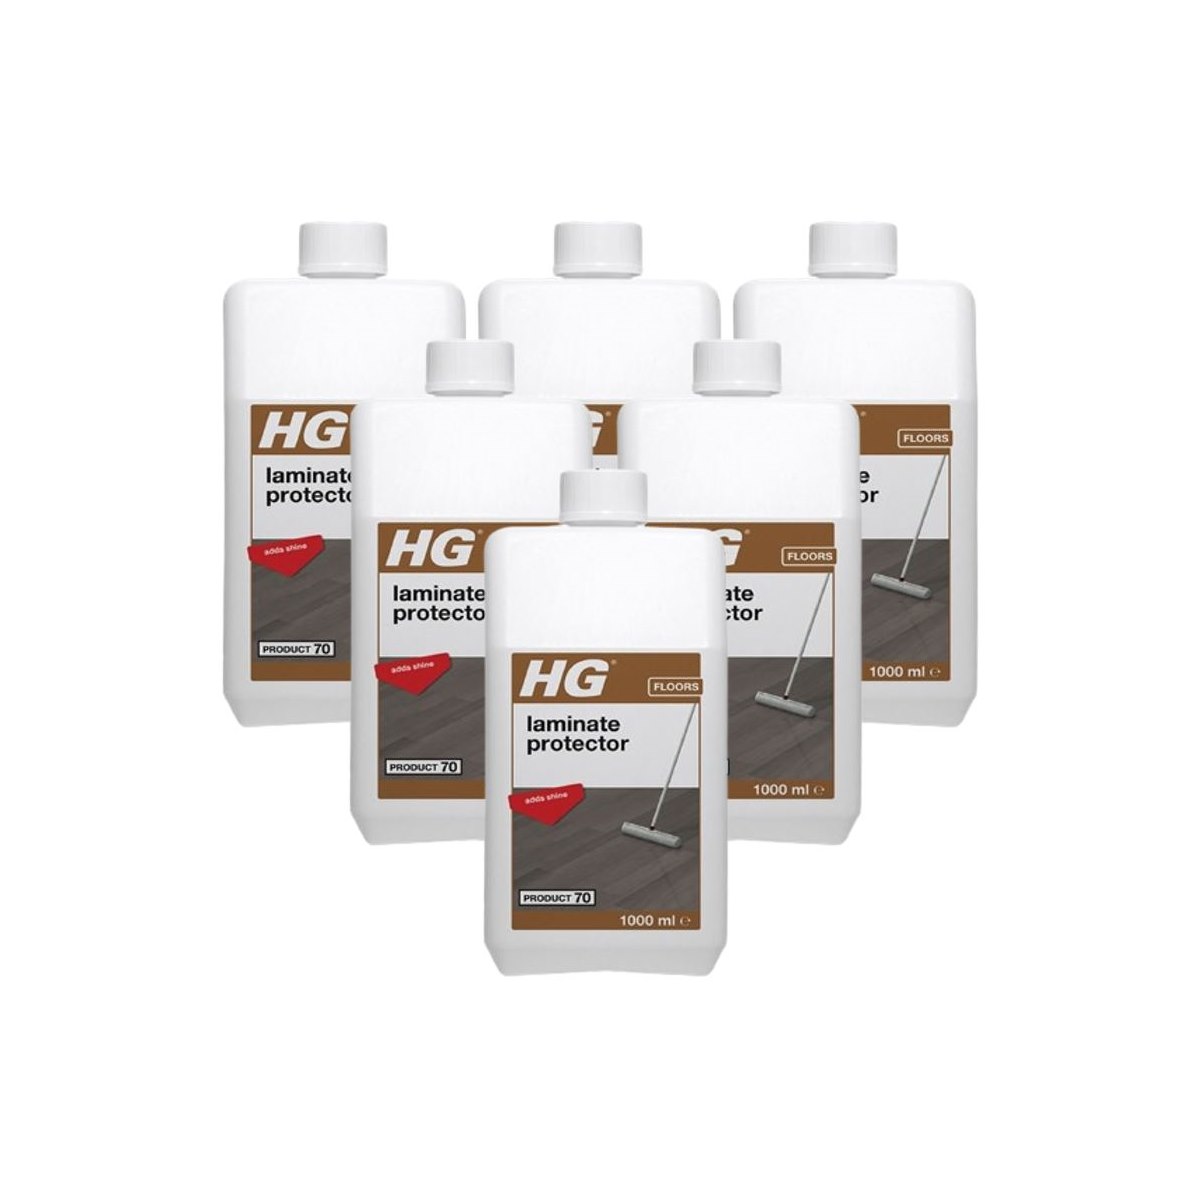 Case of 6 x HG Laminate Protector 1 Litre Product 70